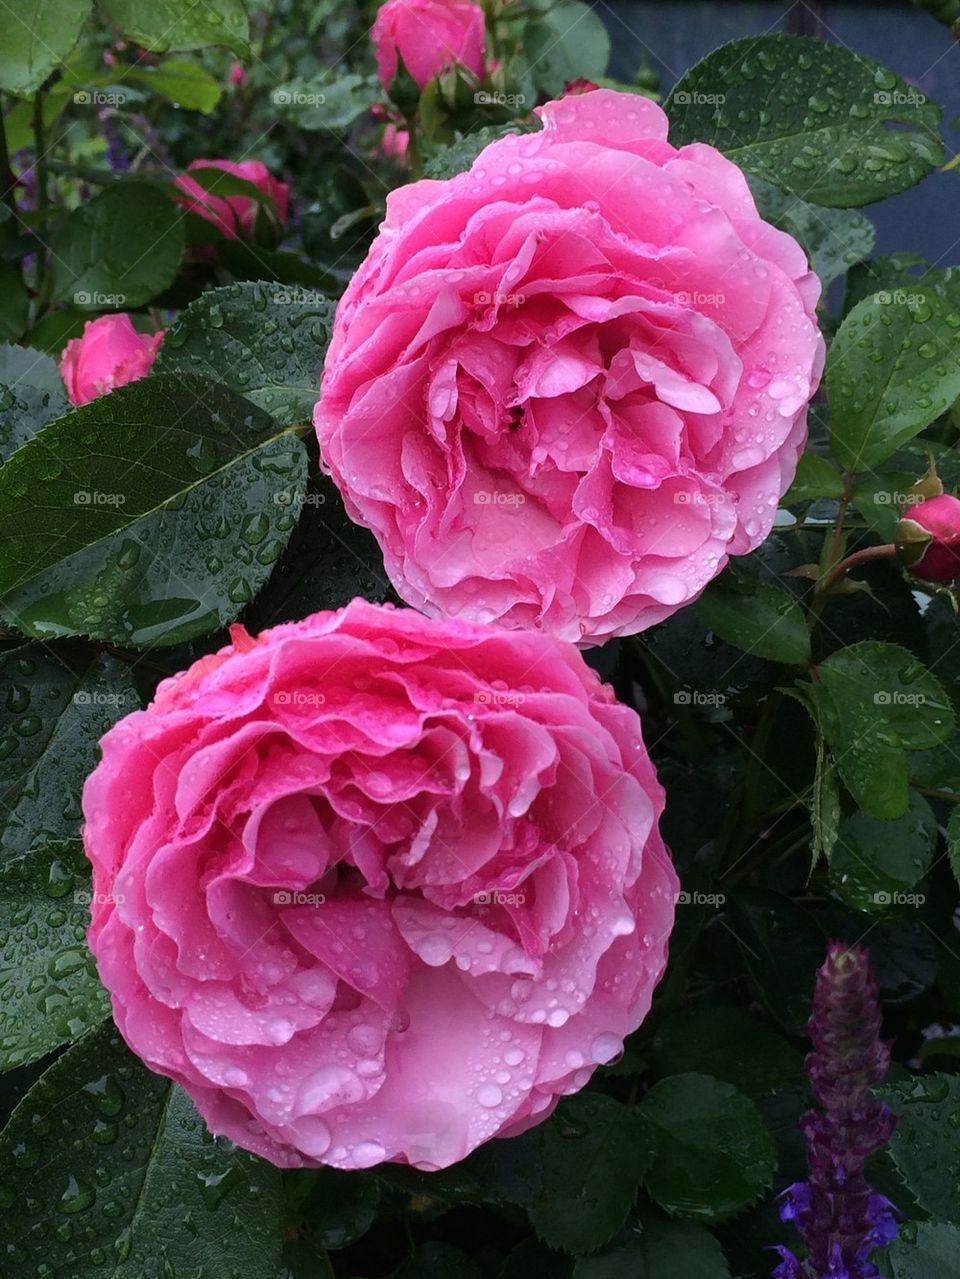 Roses after rainfall